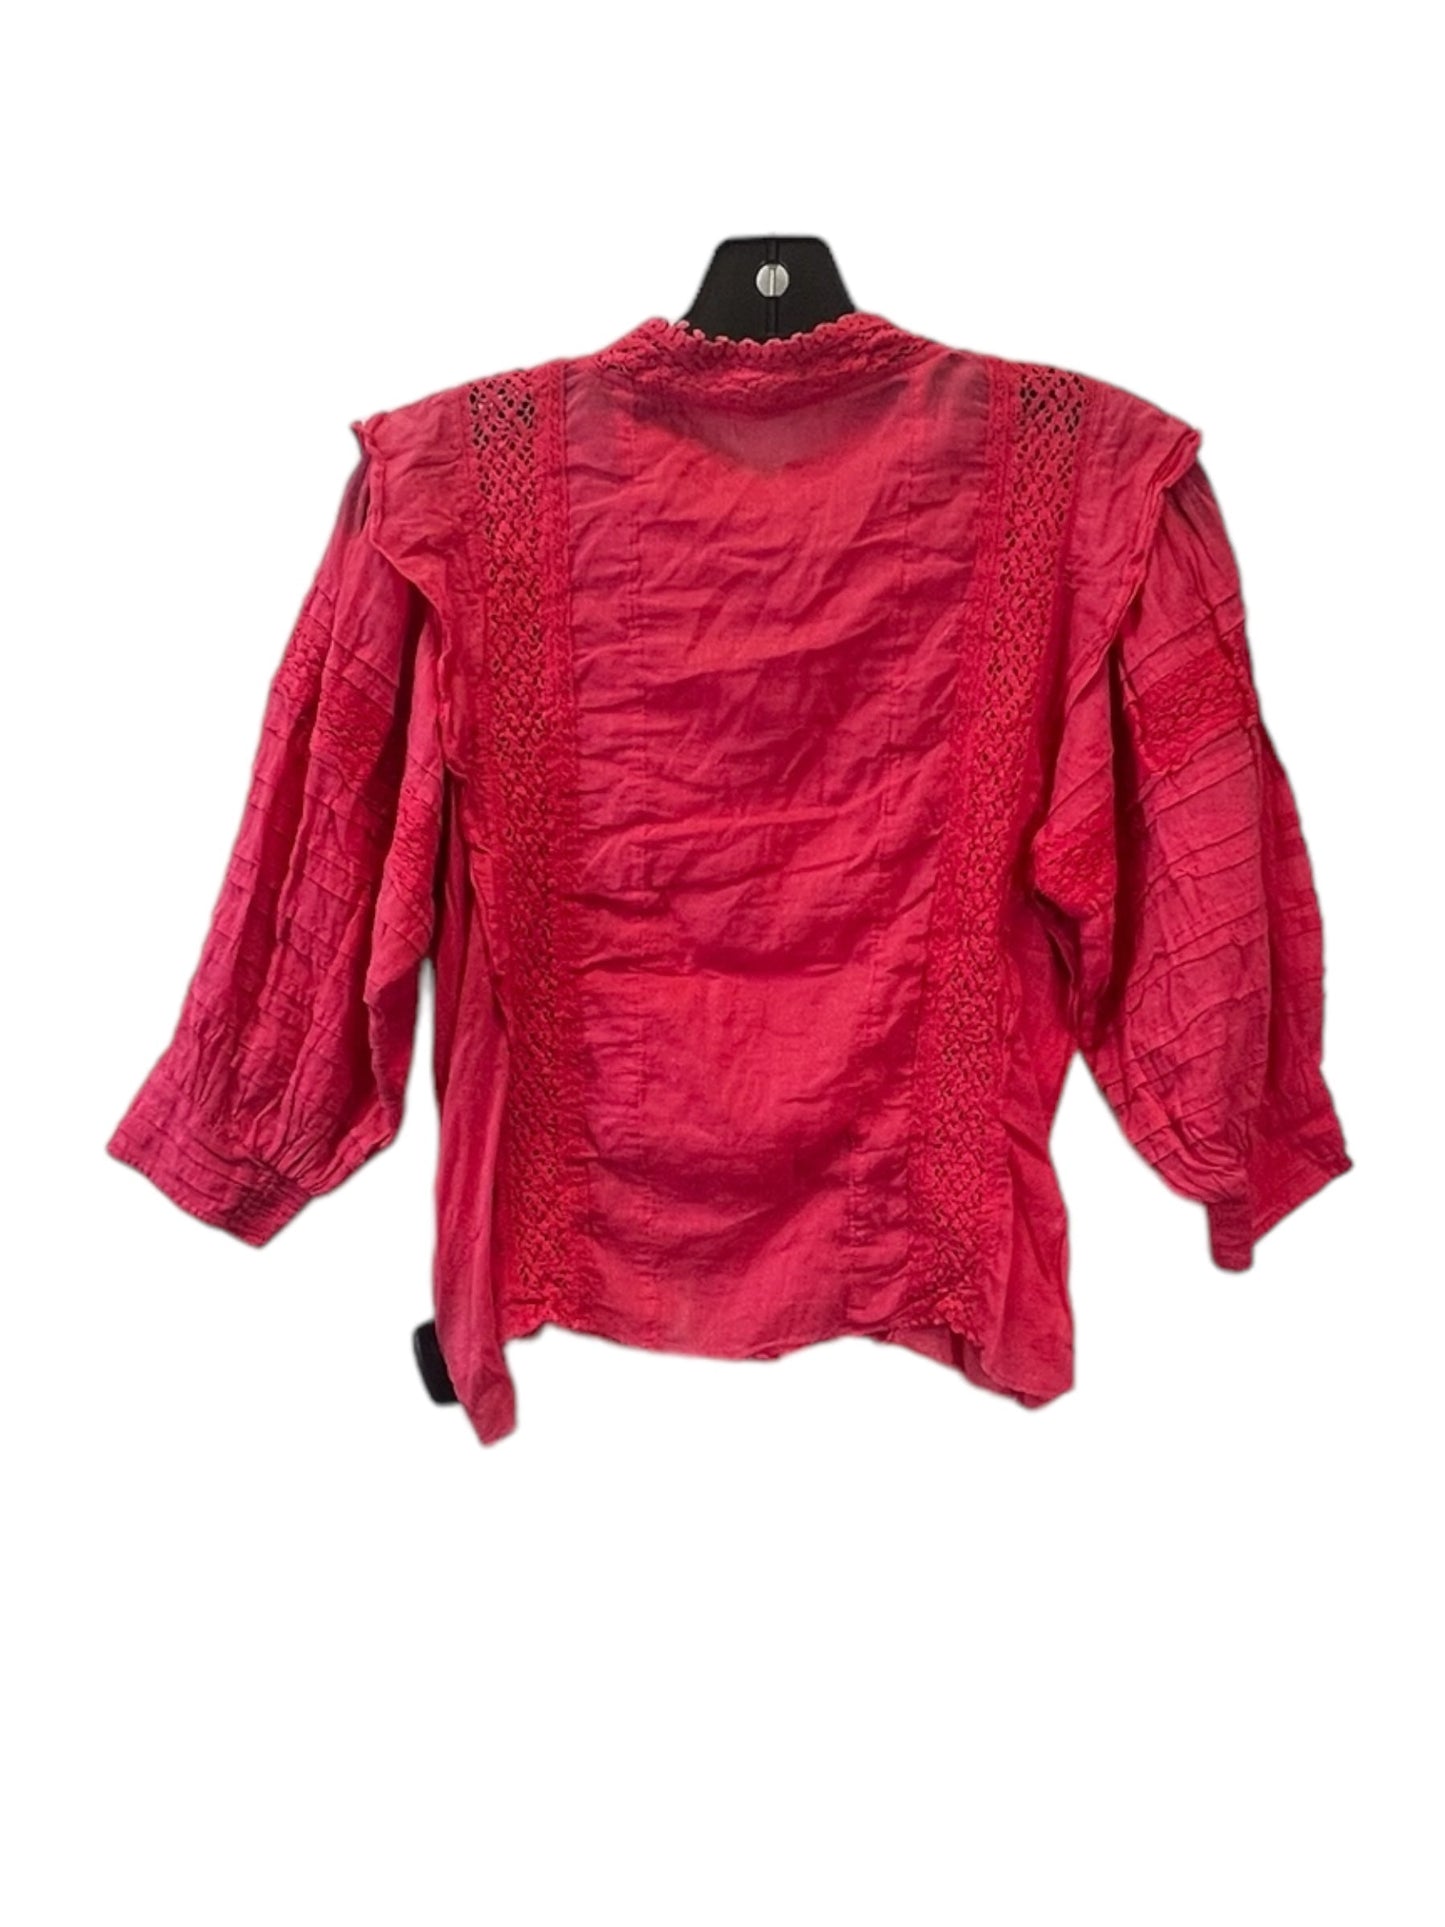 Pink Top Long Sleeve Free Press, Size S